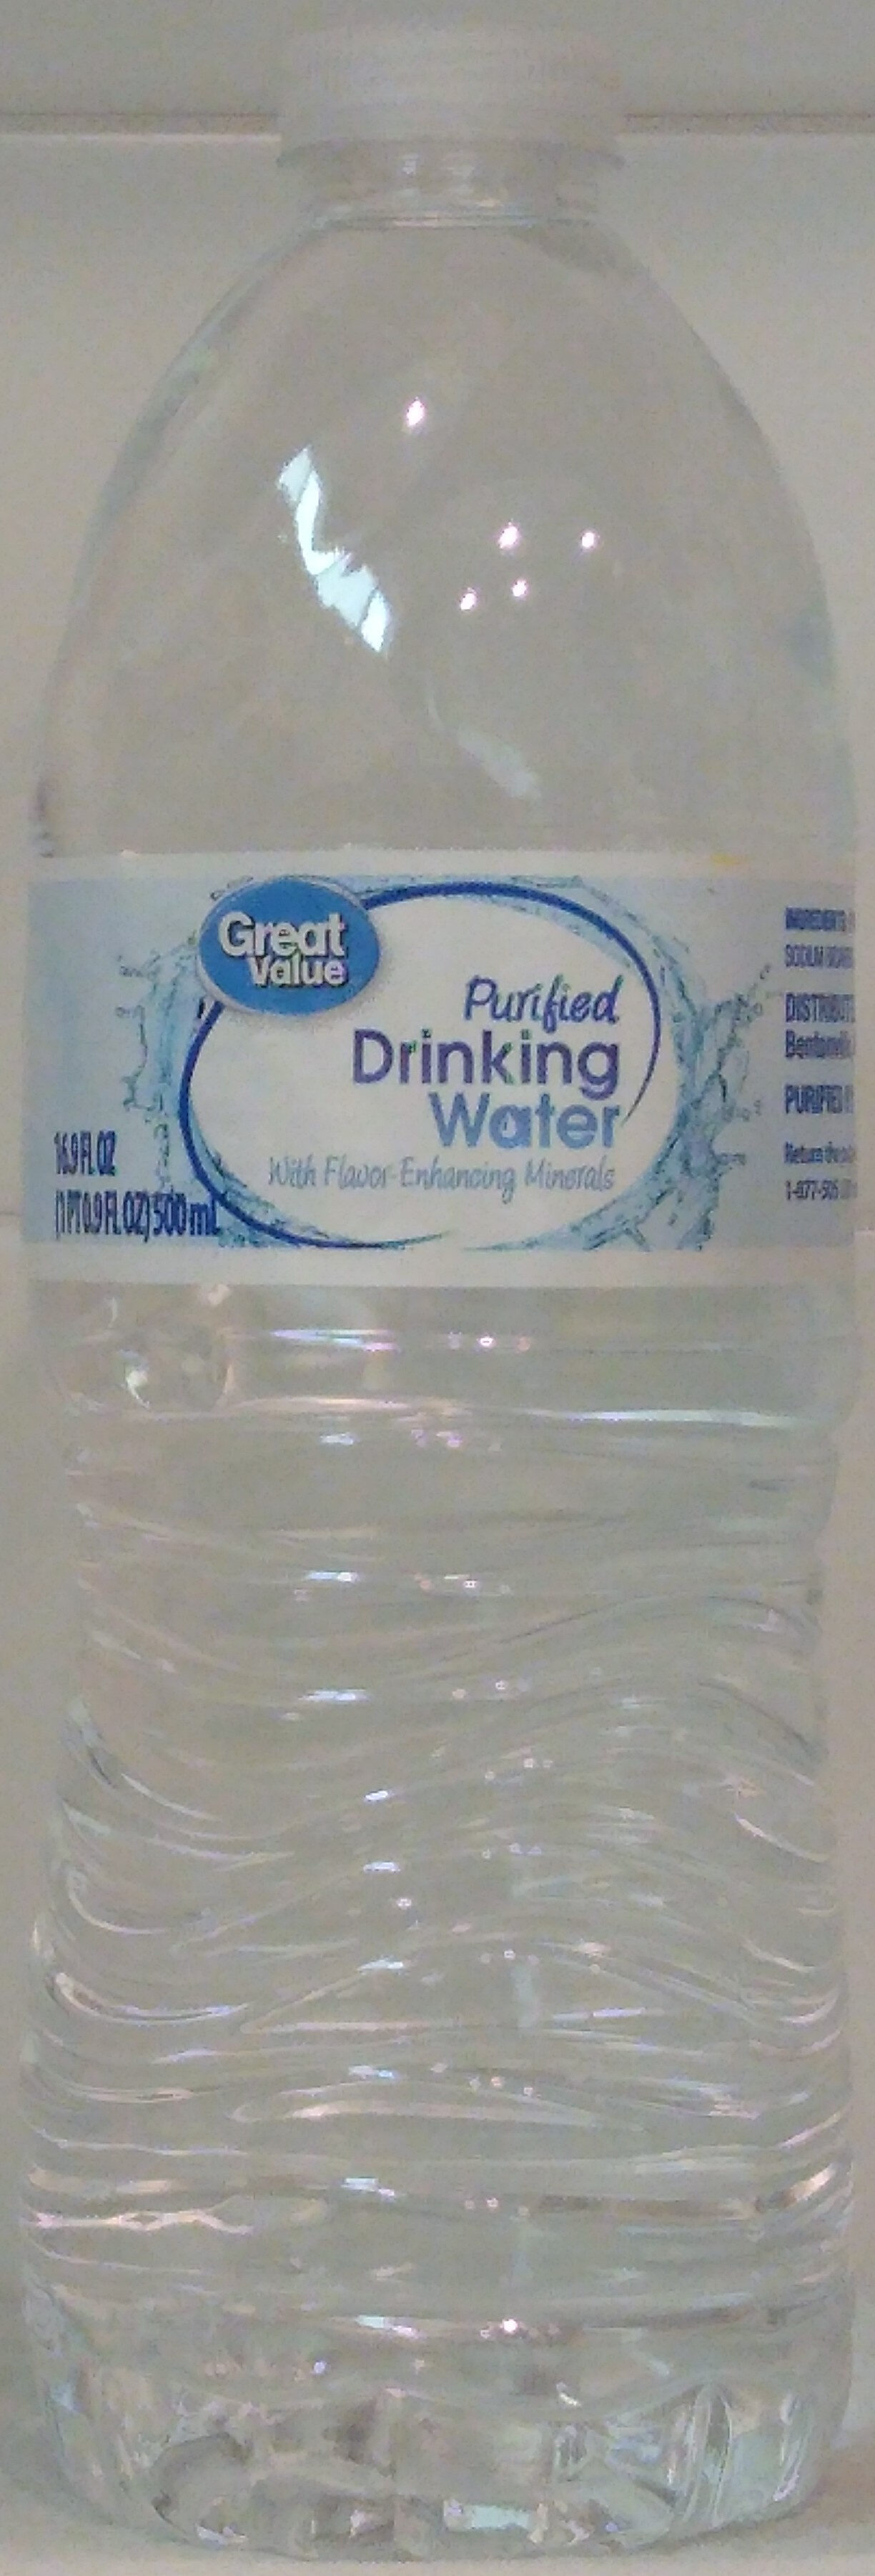 Great value, purified drinking water - Product - en